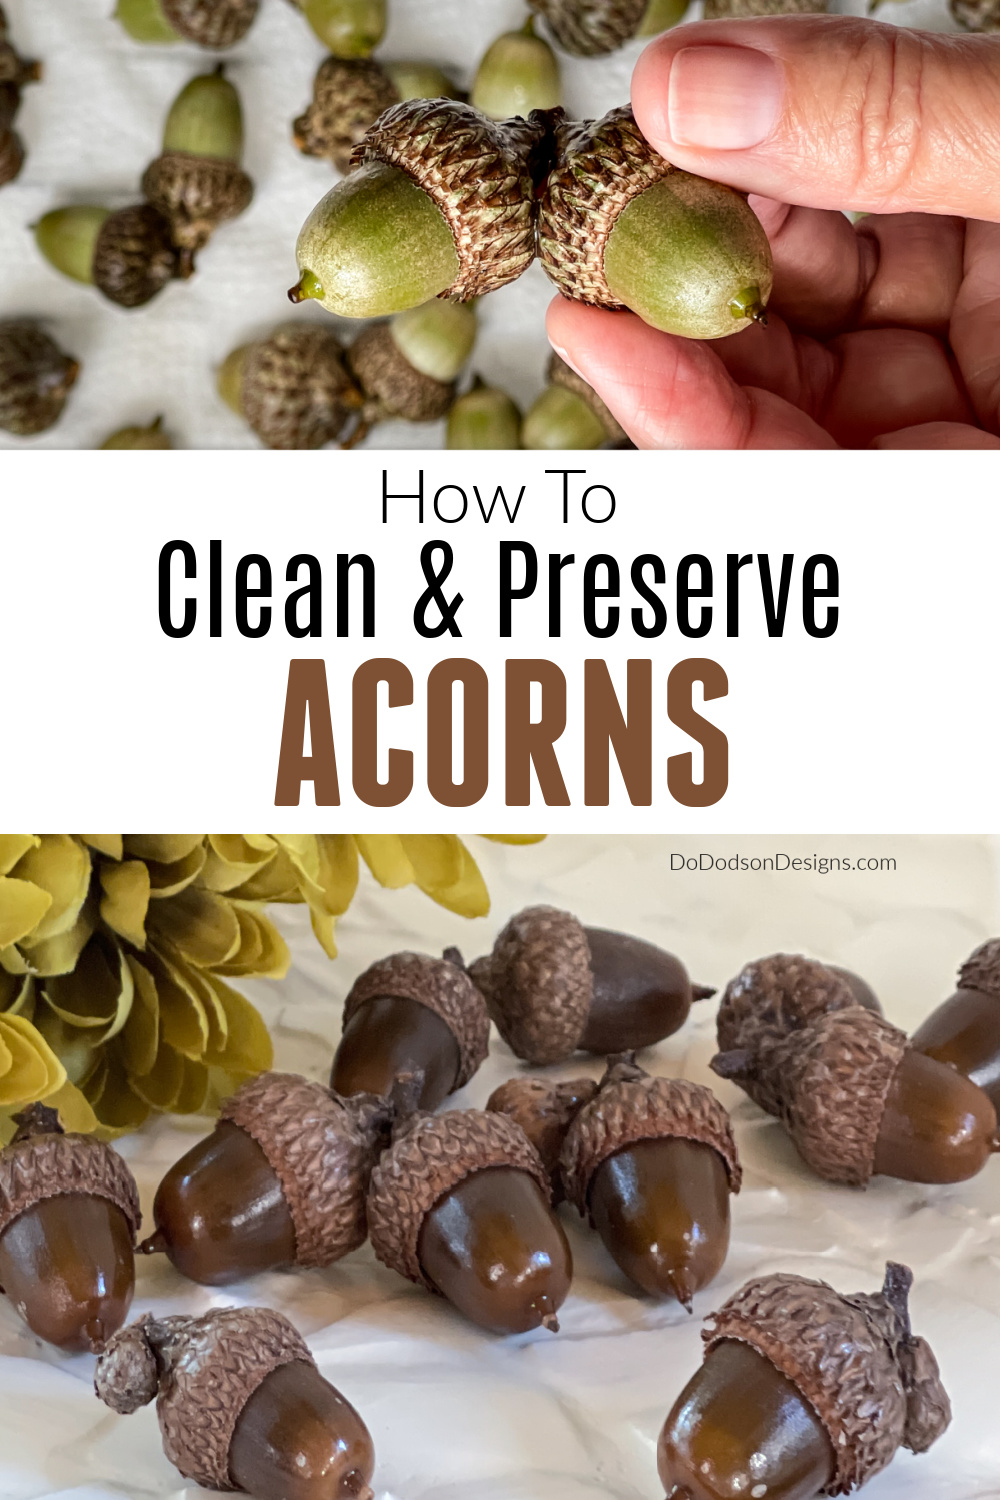 How To Preserve Acorns for Fall Crafts and Decorating - Do Dodson Designs